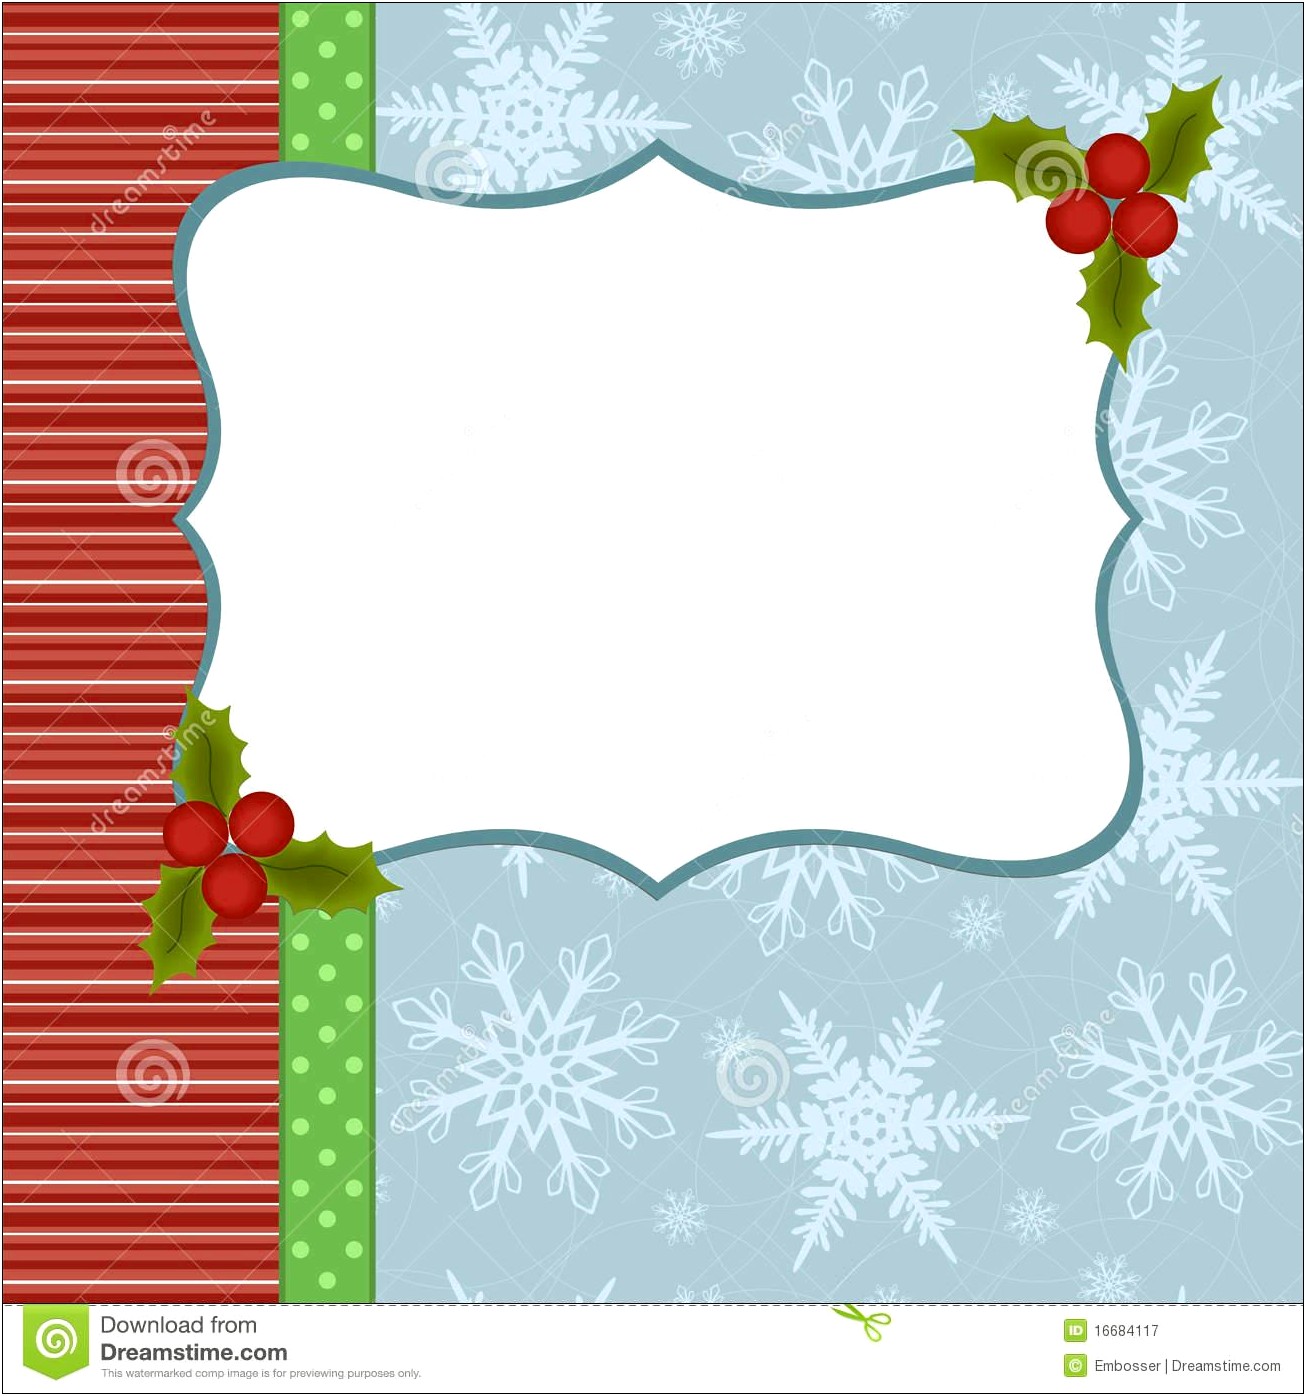 Blank Christmas Greeting Card Template Free Download